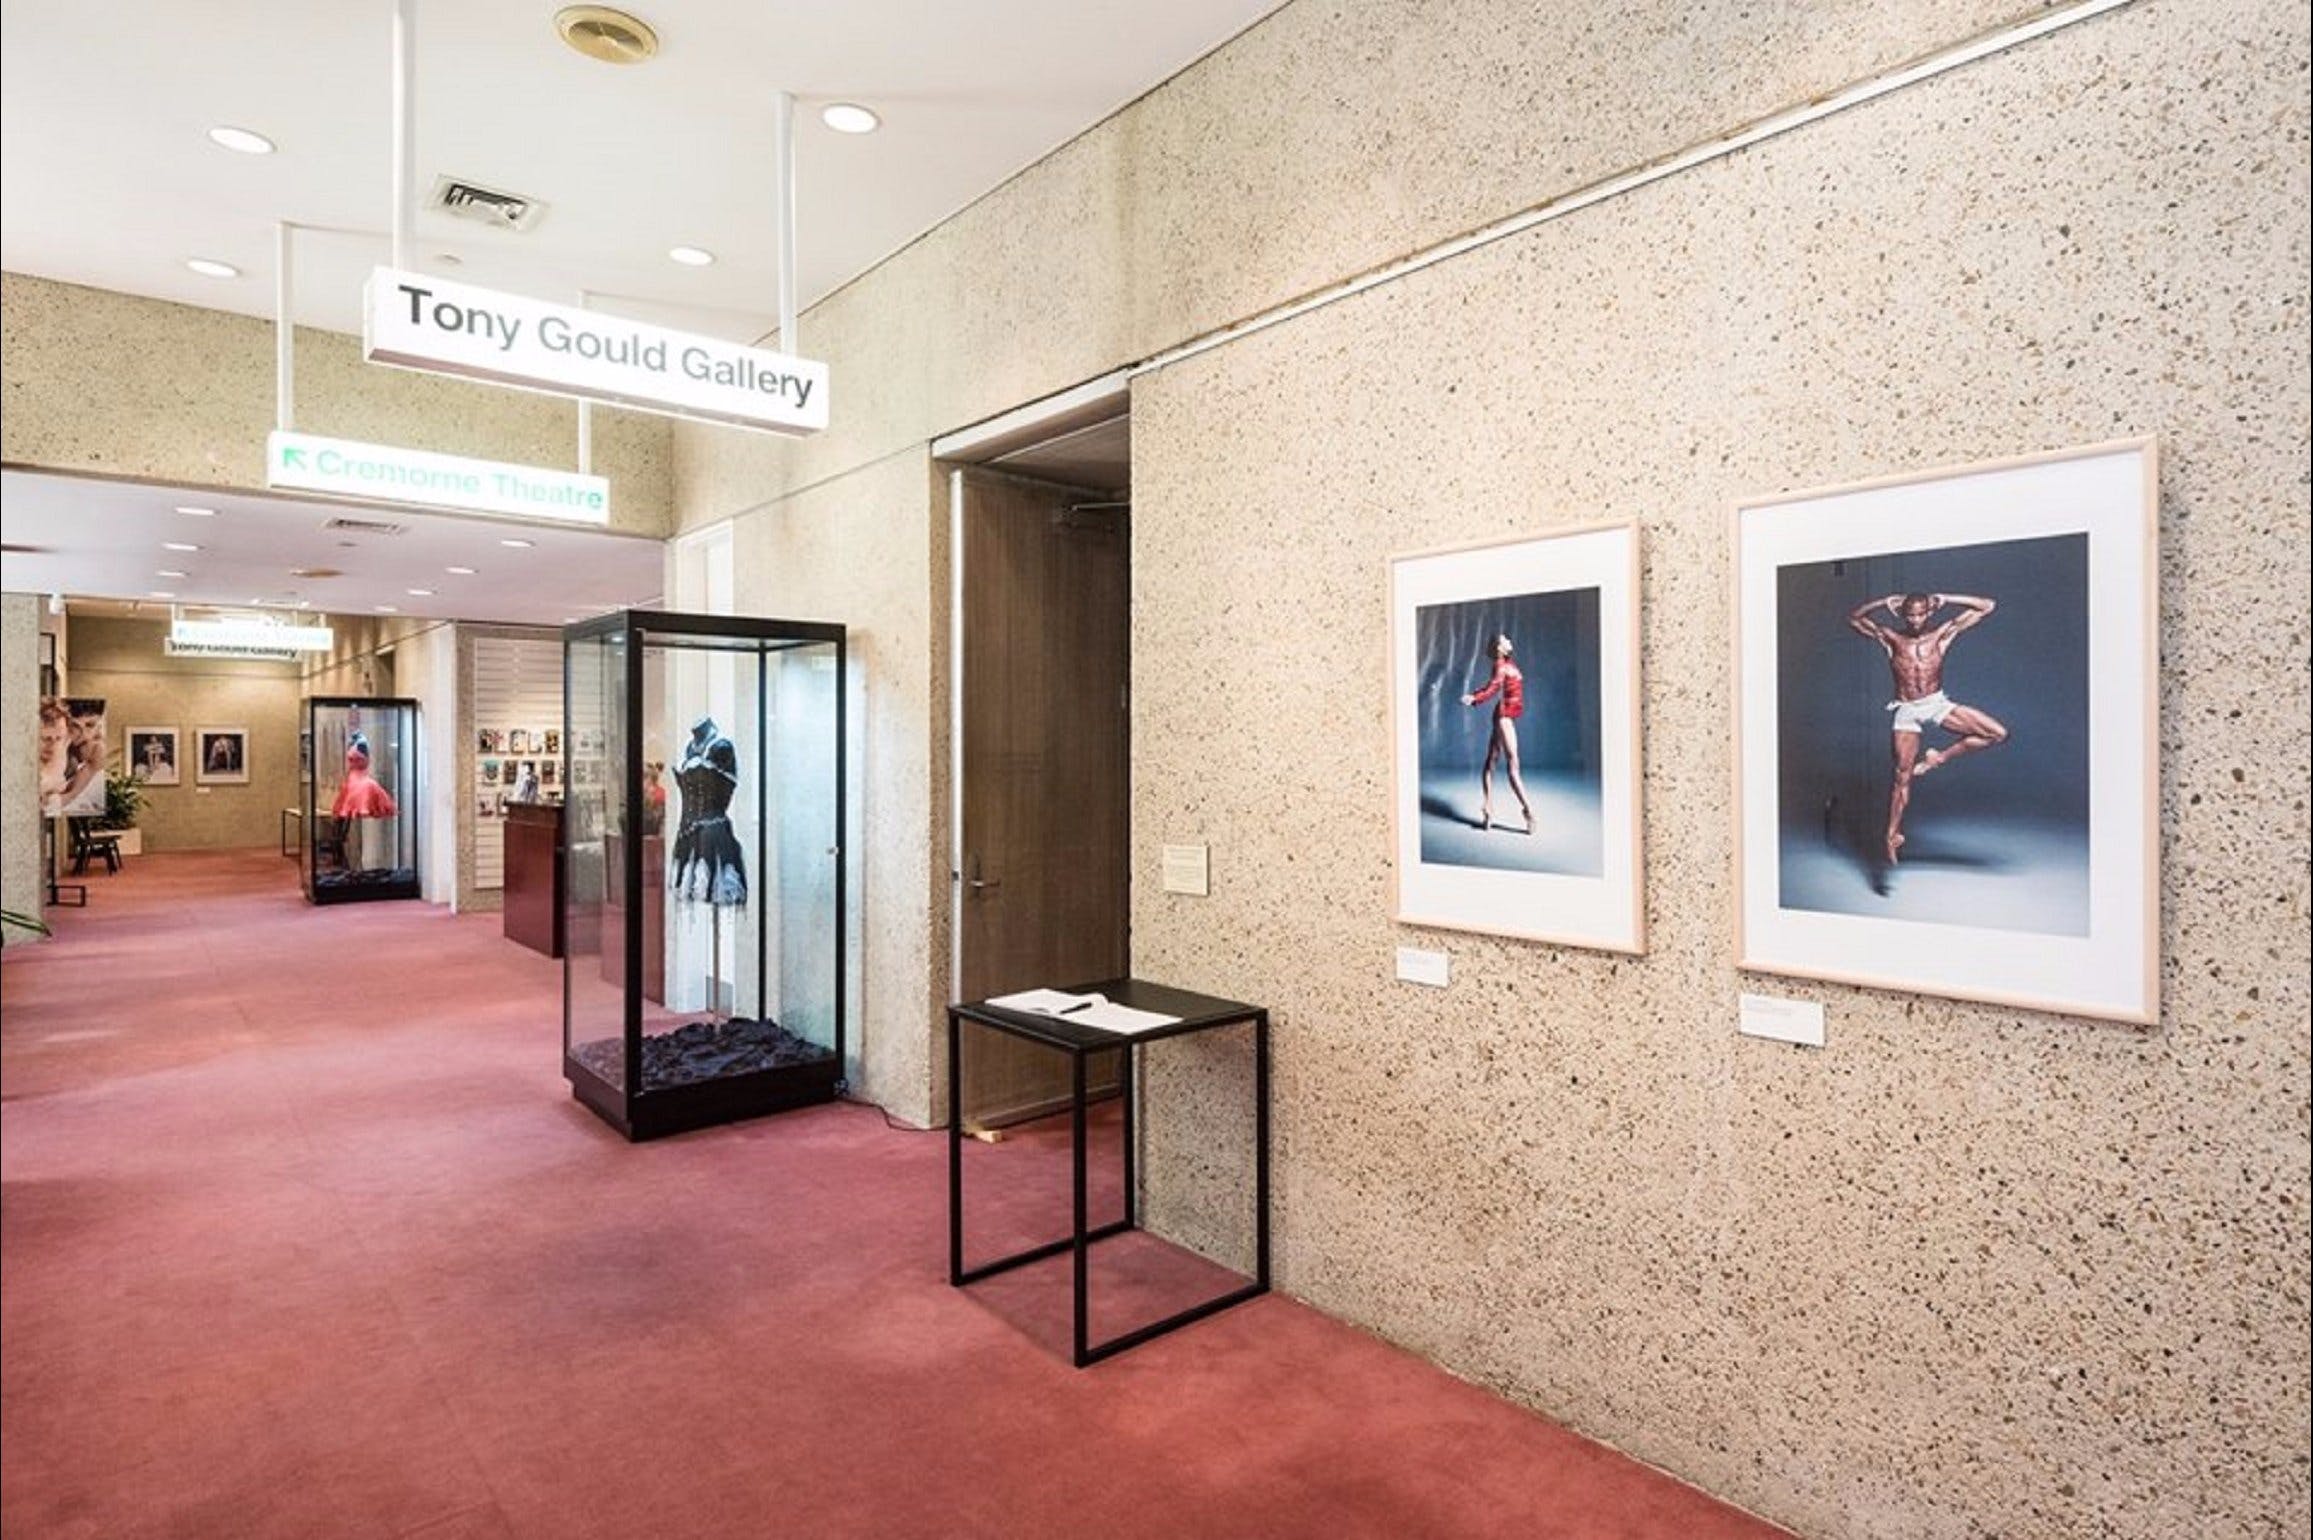 Tony Gould Gallery - Accommodation in Surfers Paradise